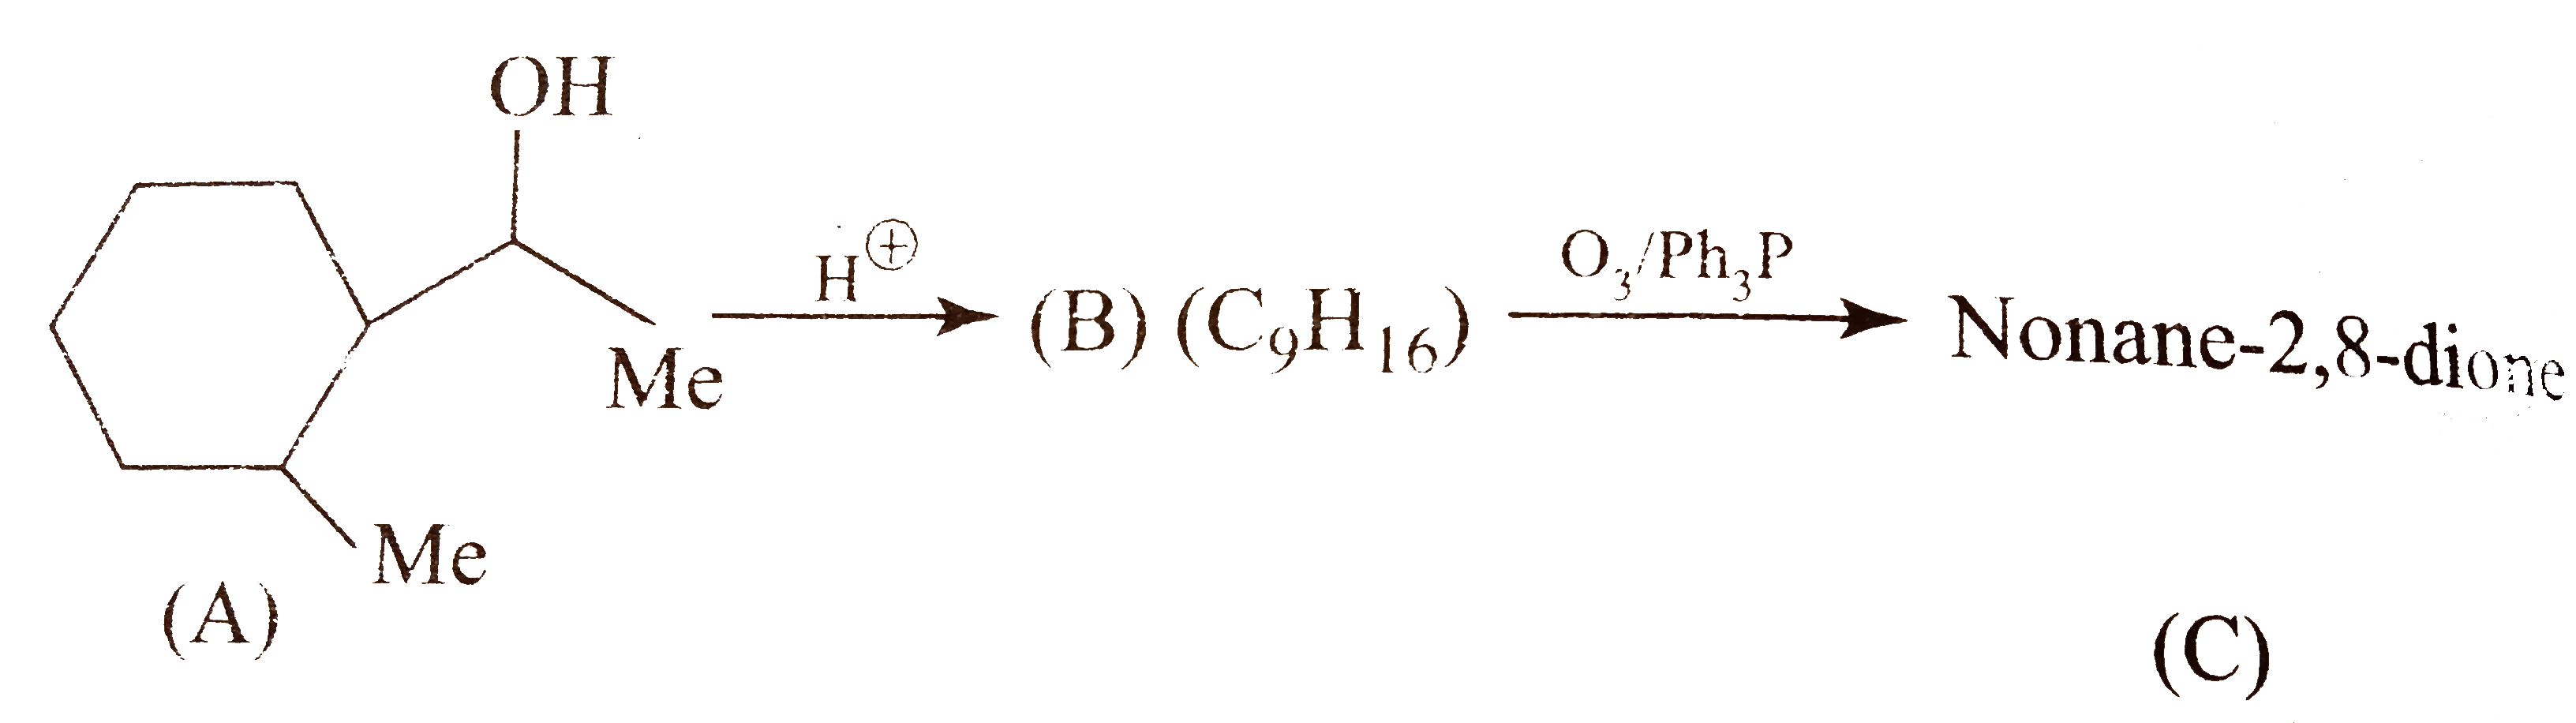 What is compound (B) and how is it formed ?